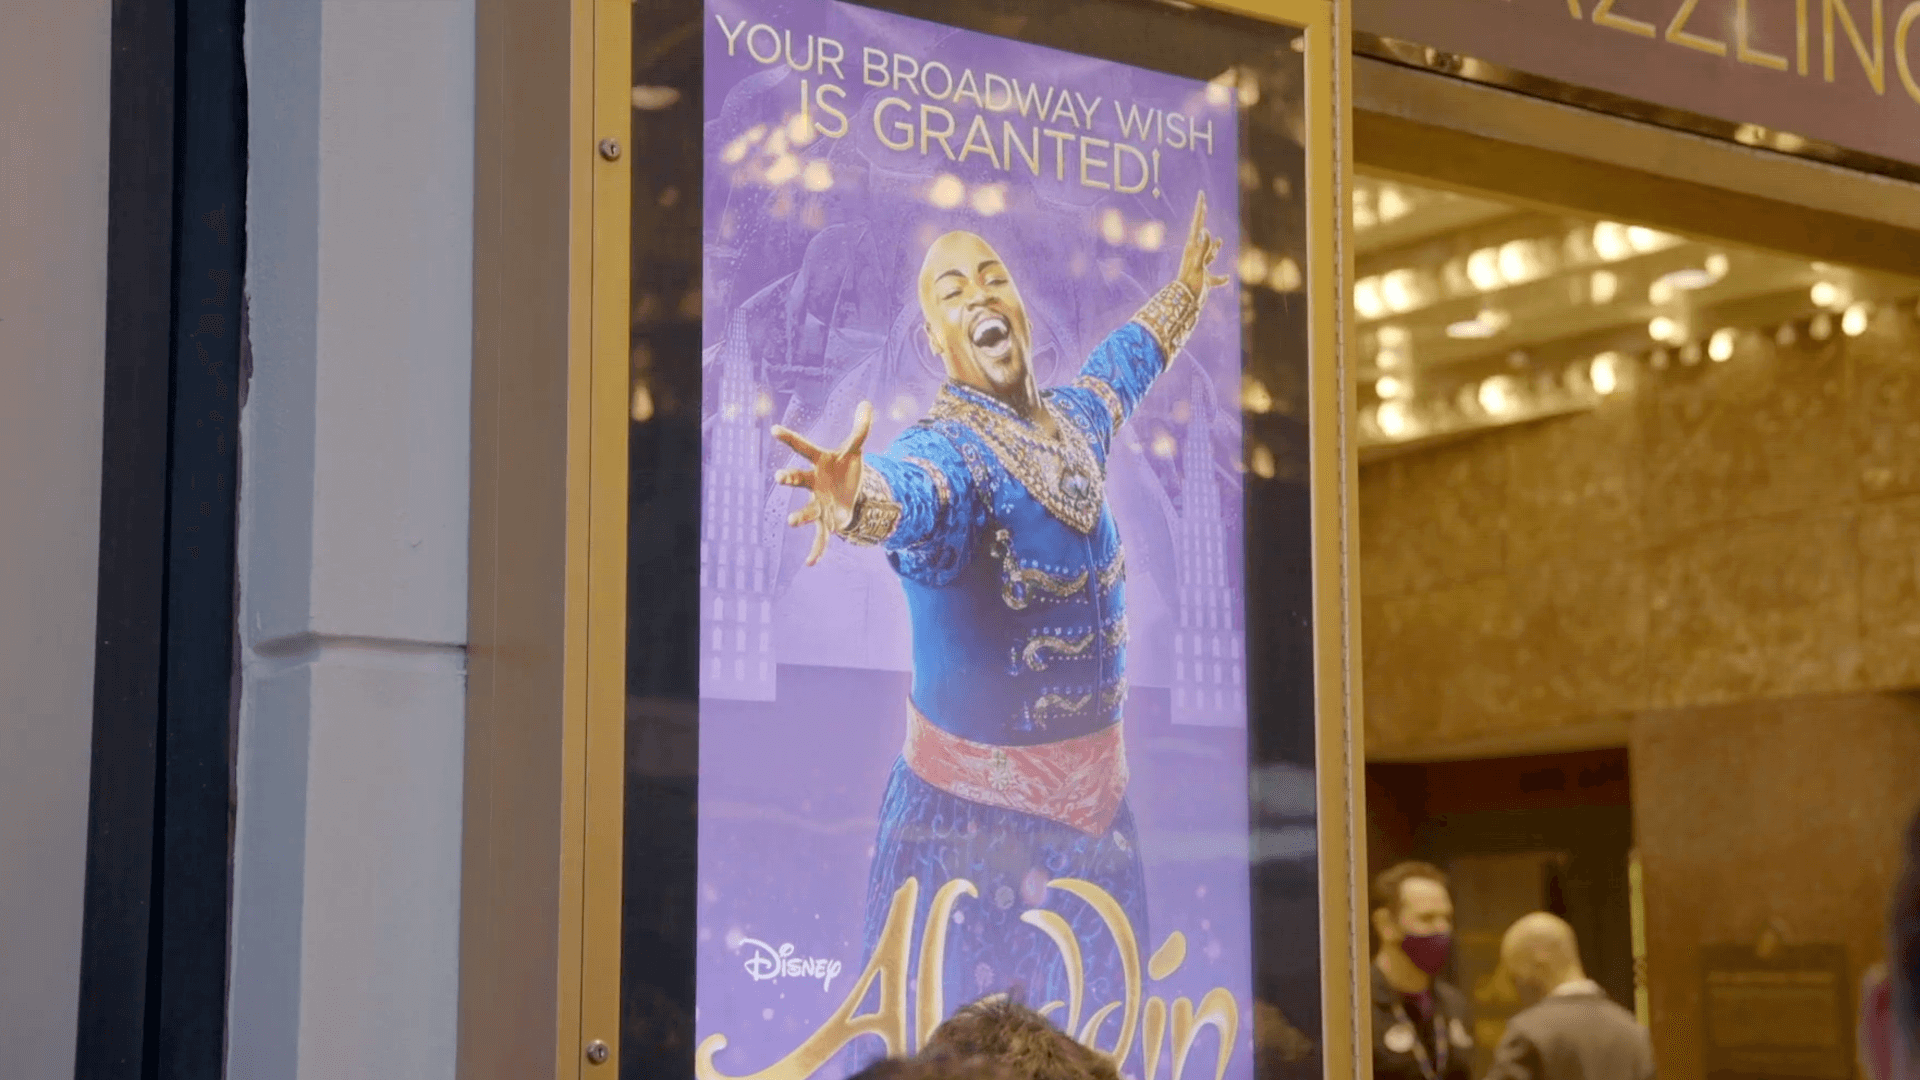 Reopening: The Broadway Revival